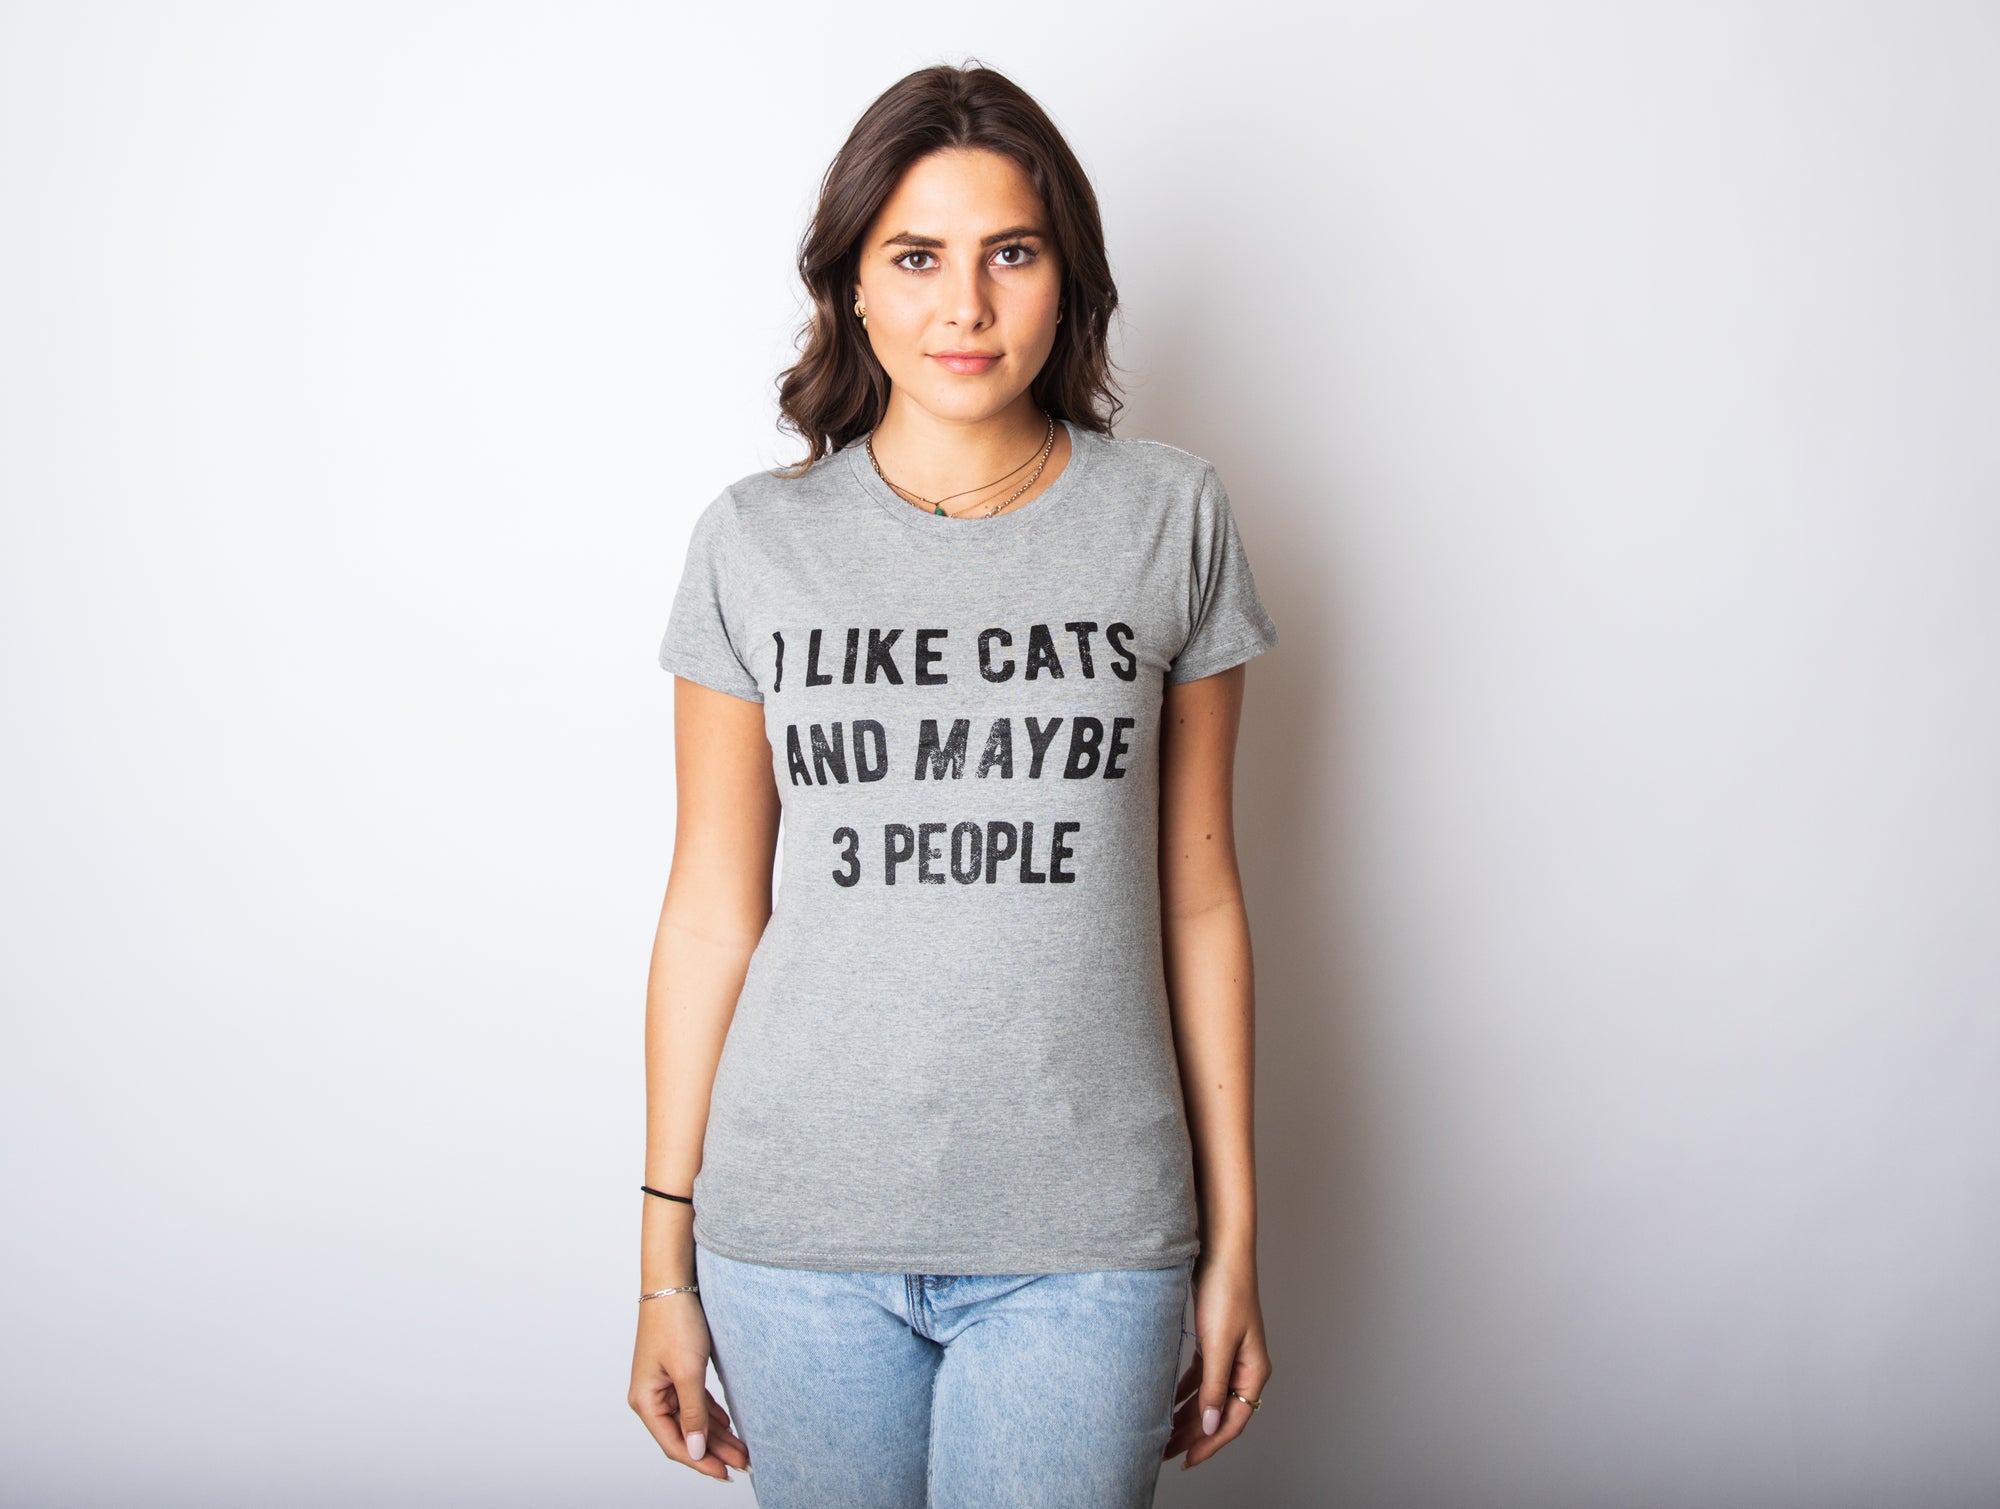 Funny Dark Heather Grey I Like Cats And Maybe 3 People Womens T Shirt Nerdy Cat introvert Tee